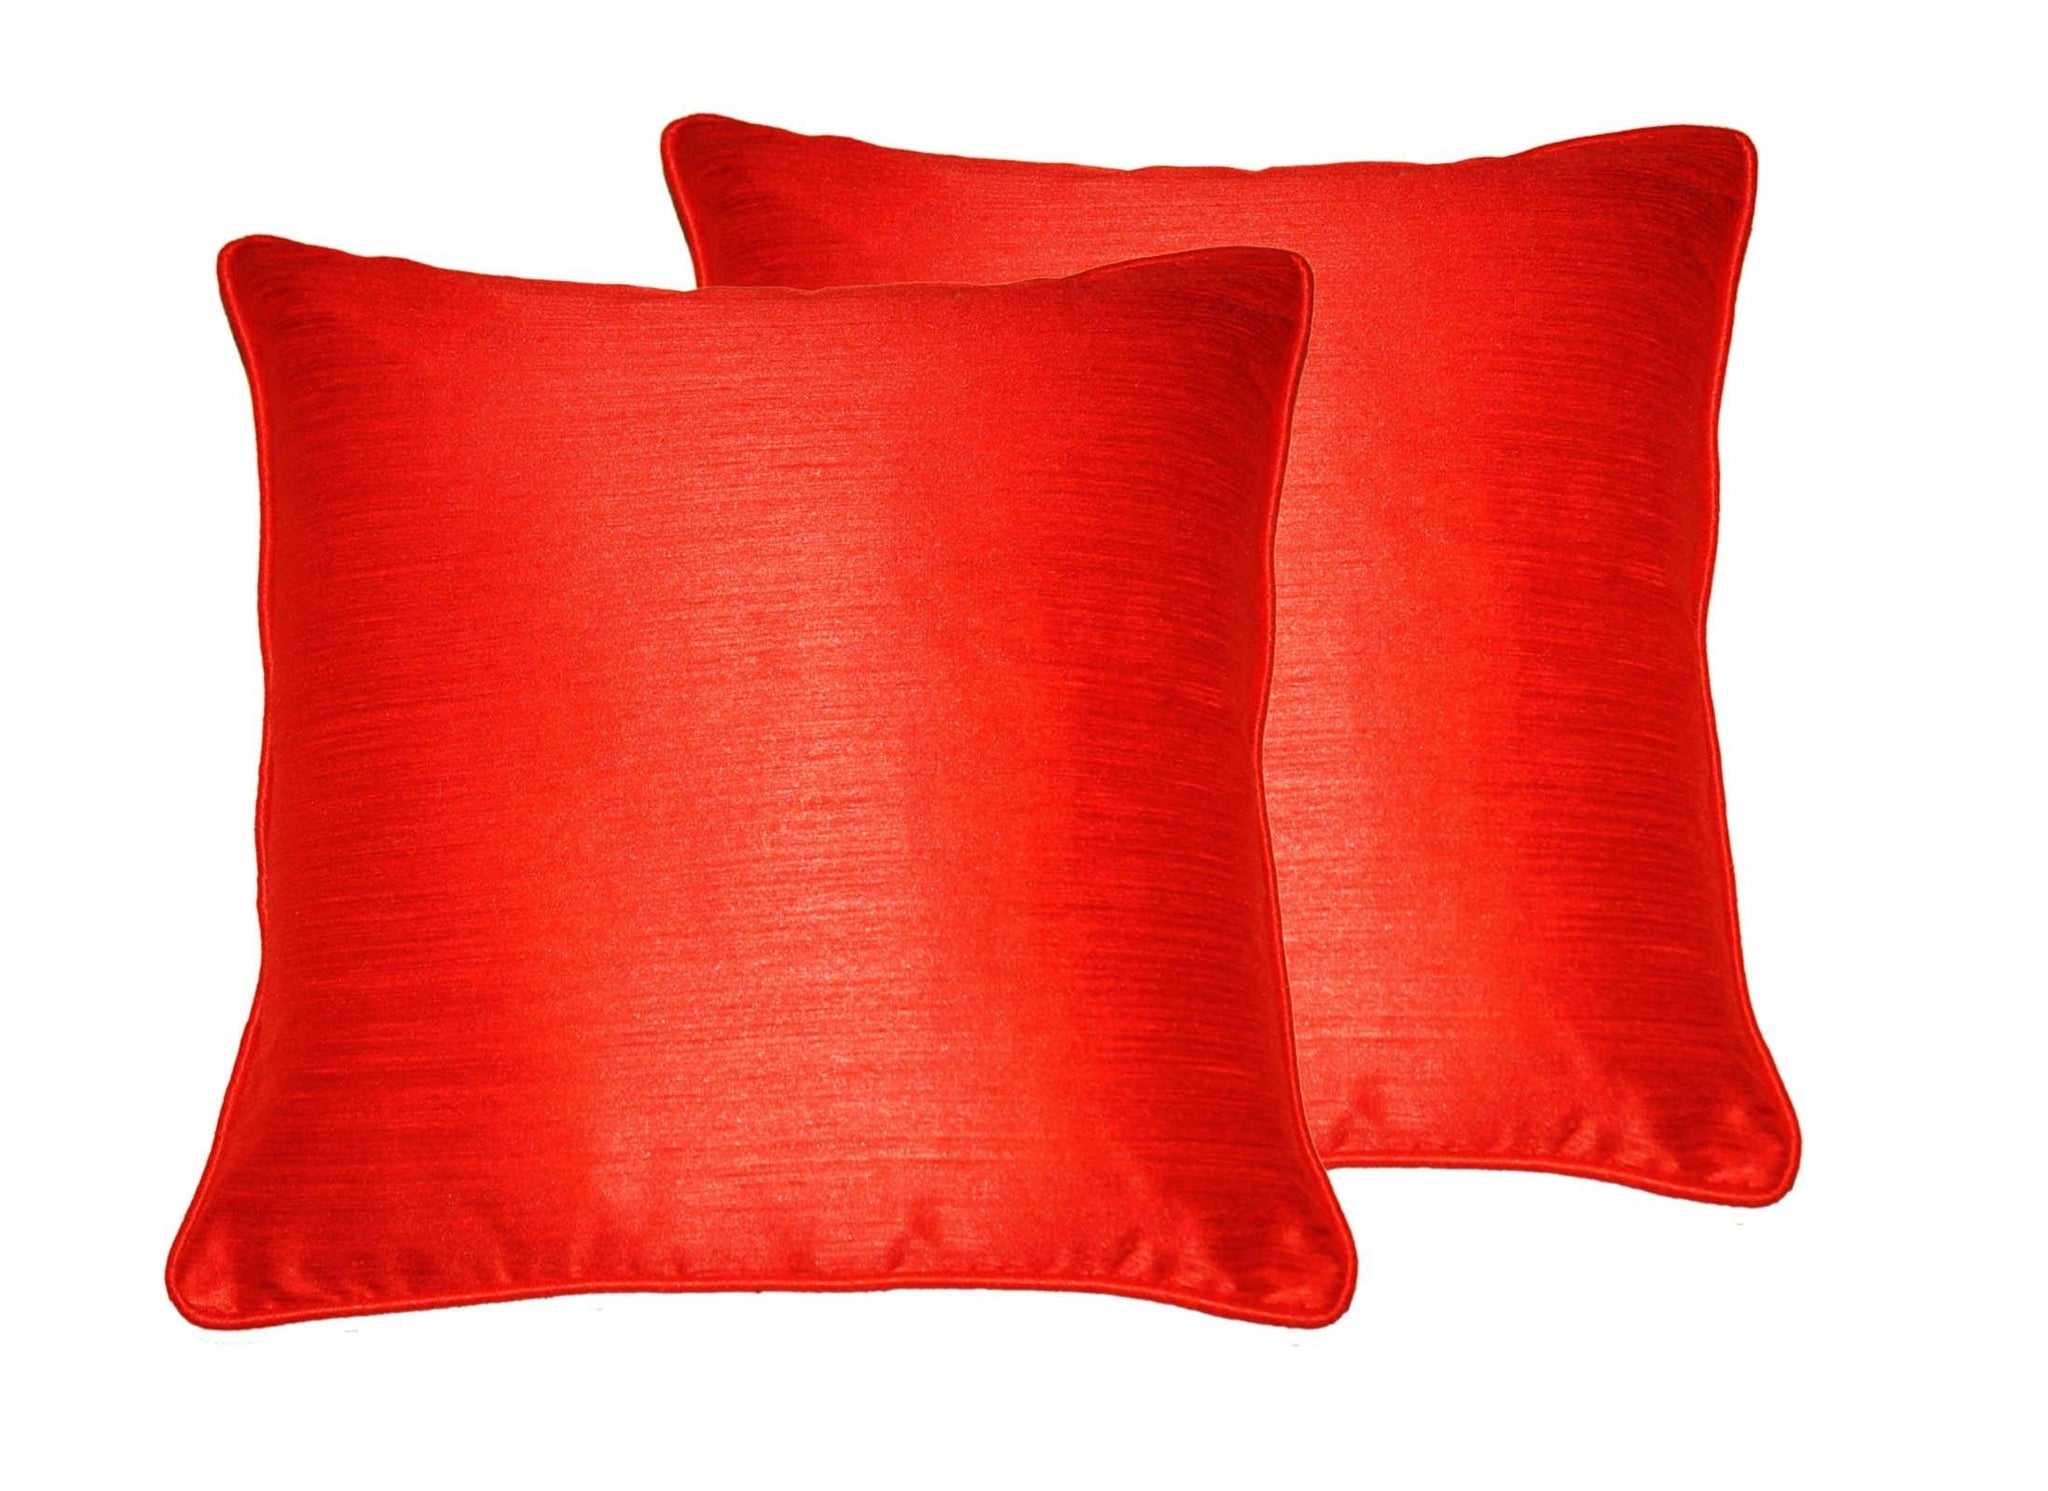 Lushomes Red Twinkle Star Cushion Covers 12 x 12 Pack of 2 - Lushomes